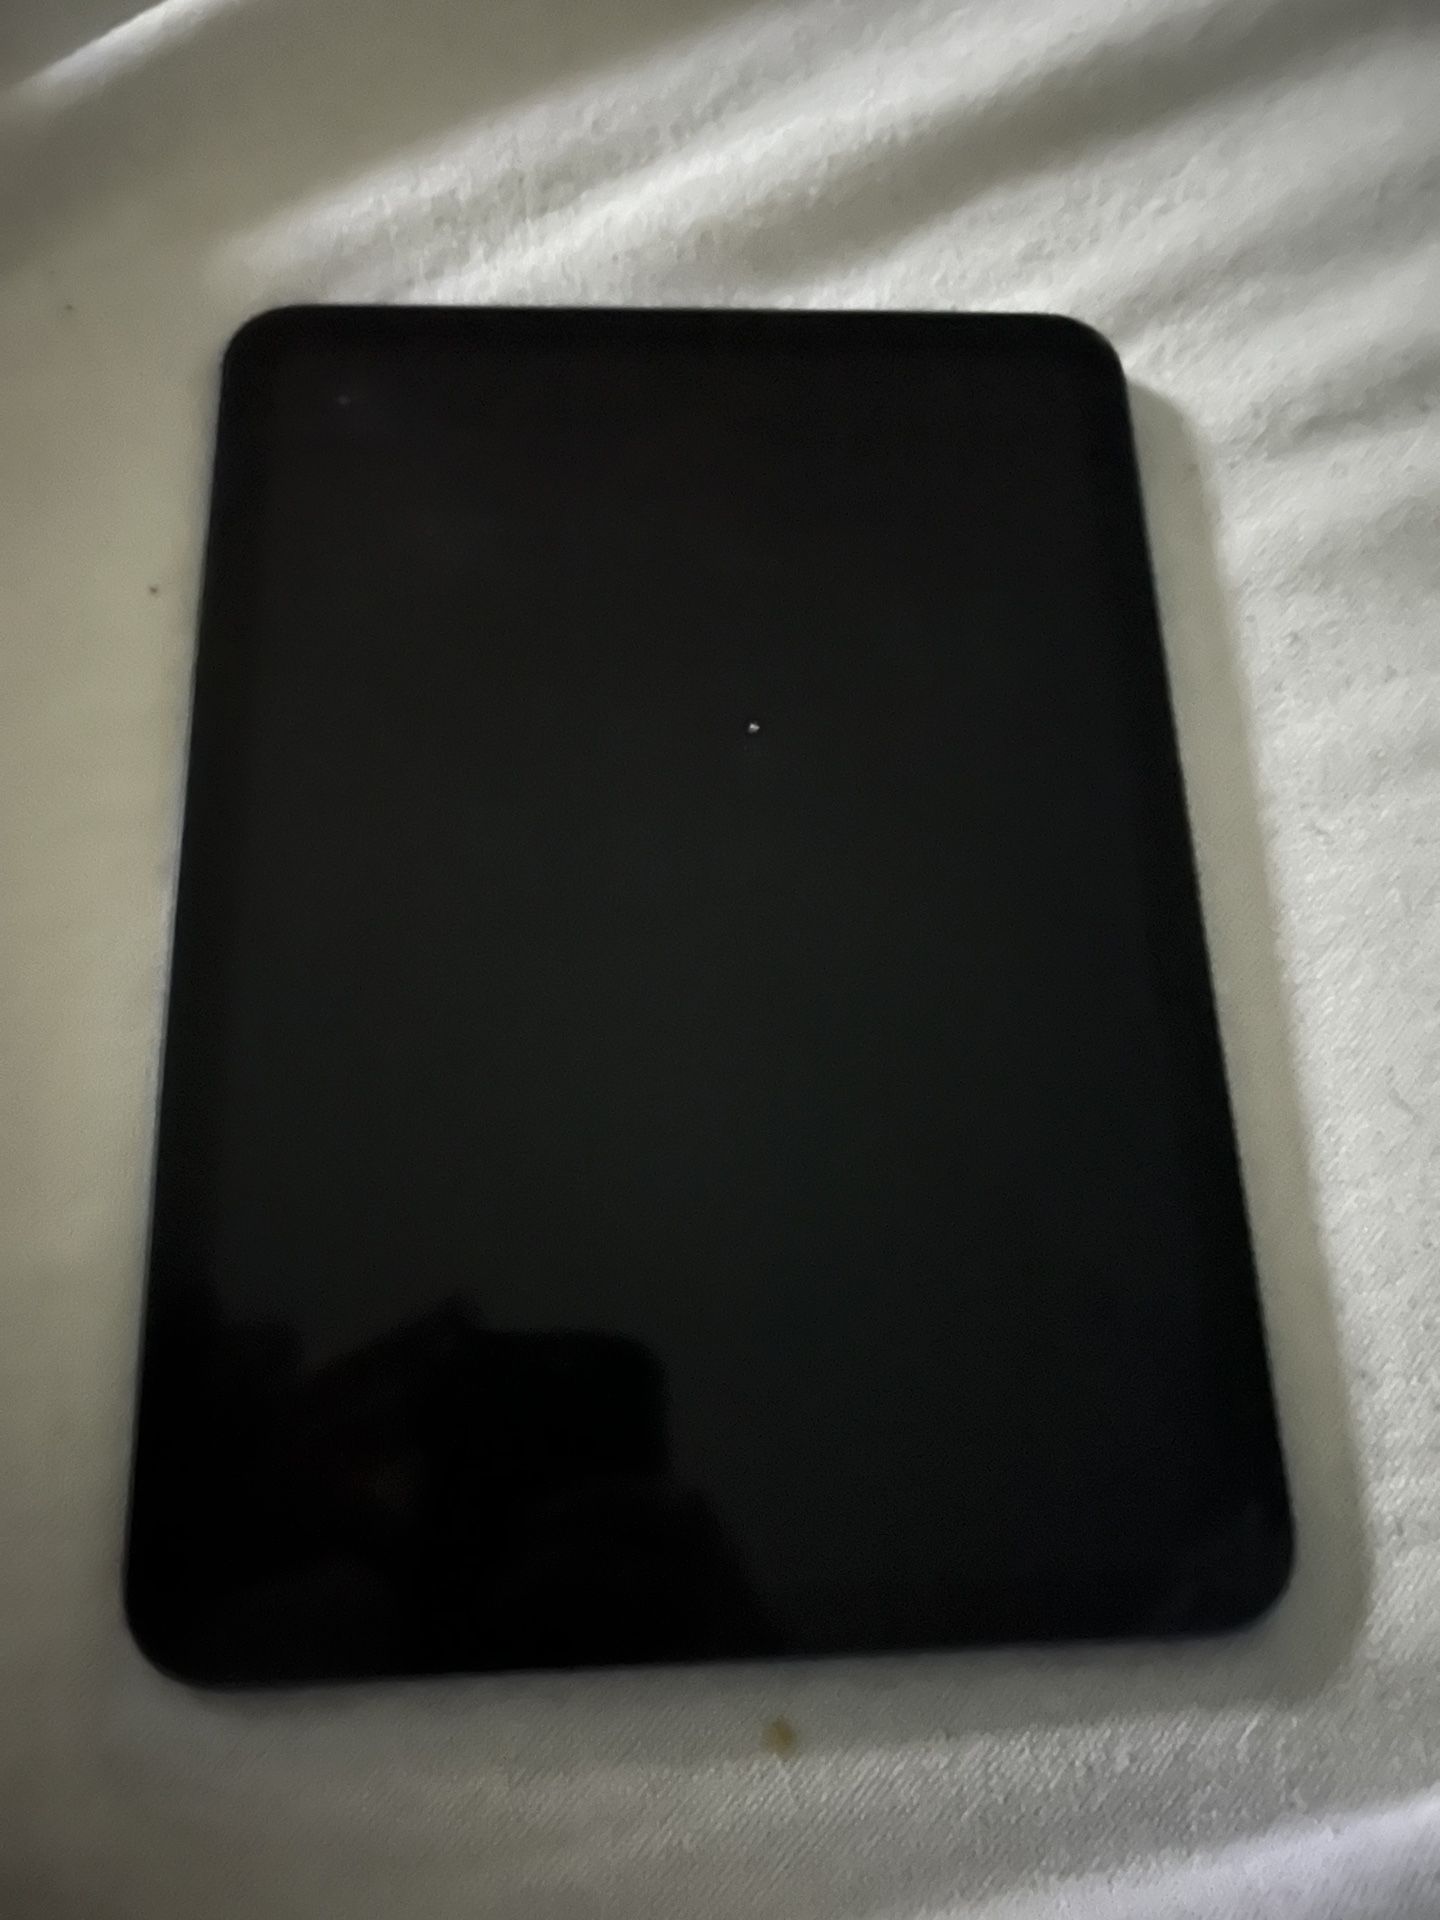 10th Gen Newest Ipad Posted For Cheap Nothing Wrong 